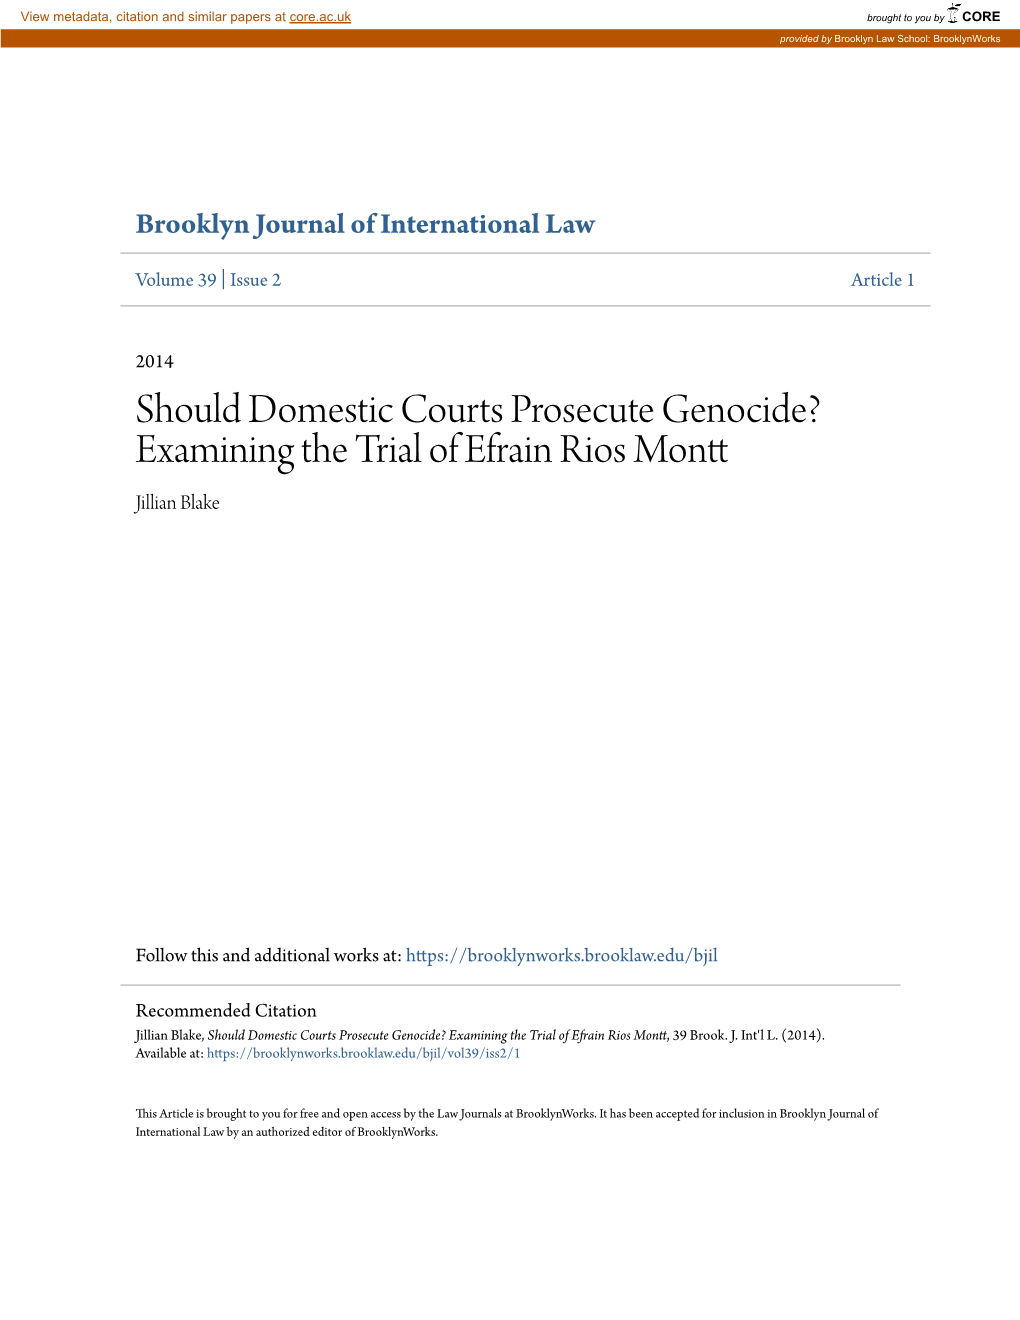 Should Domestic Courts Prosecute Genocide? Examining the Trial of Efrain Rios Montt Jillian Blake